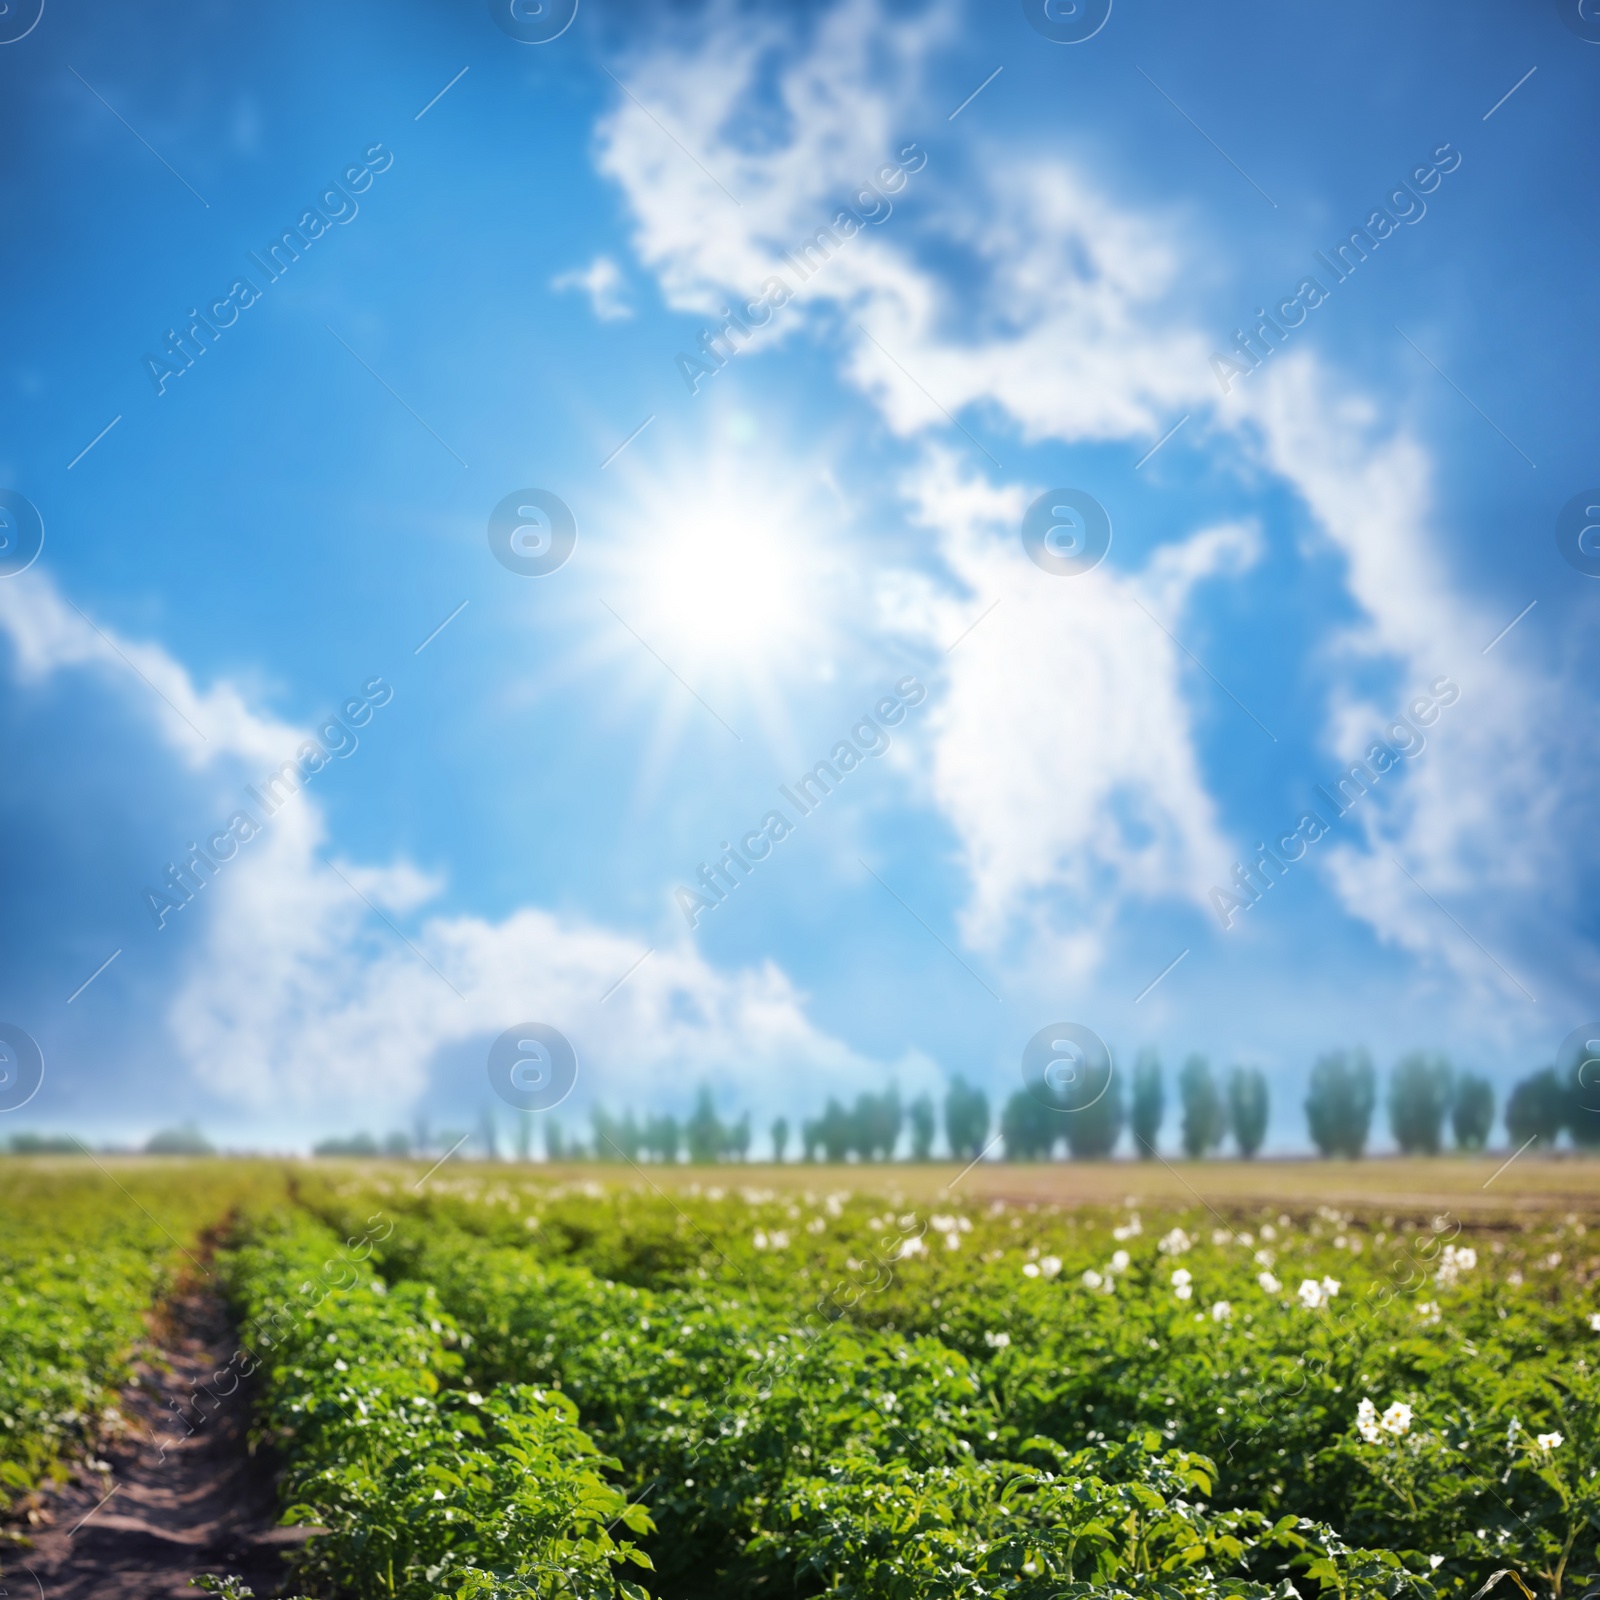 Image of Picturesque view of blooming potato field against blue sky with fluffy clouds. Organic farming